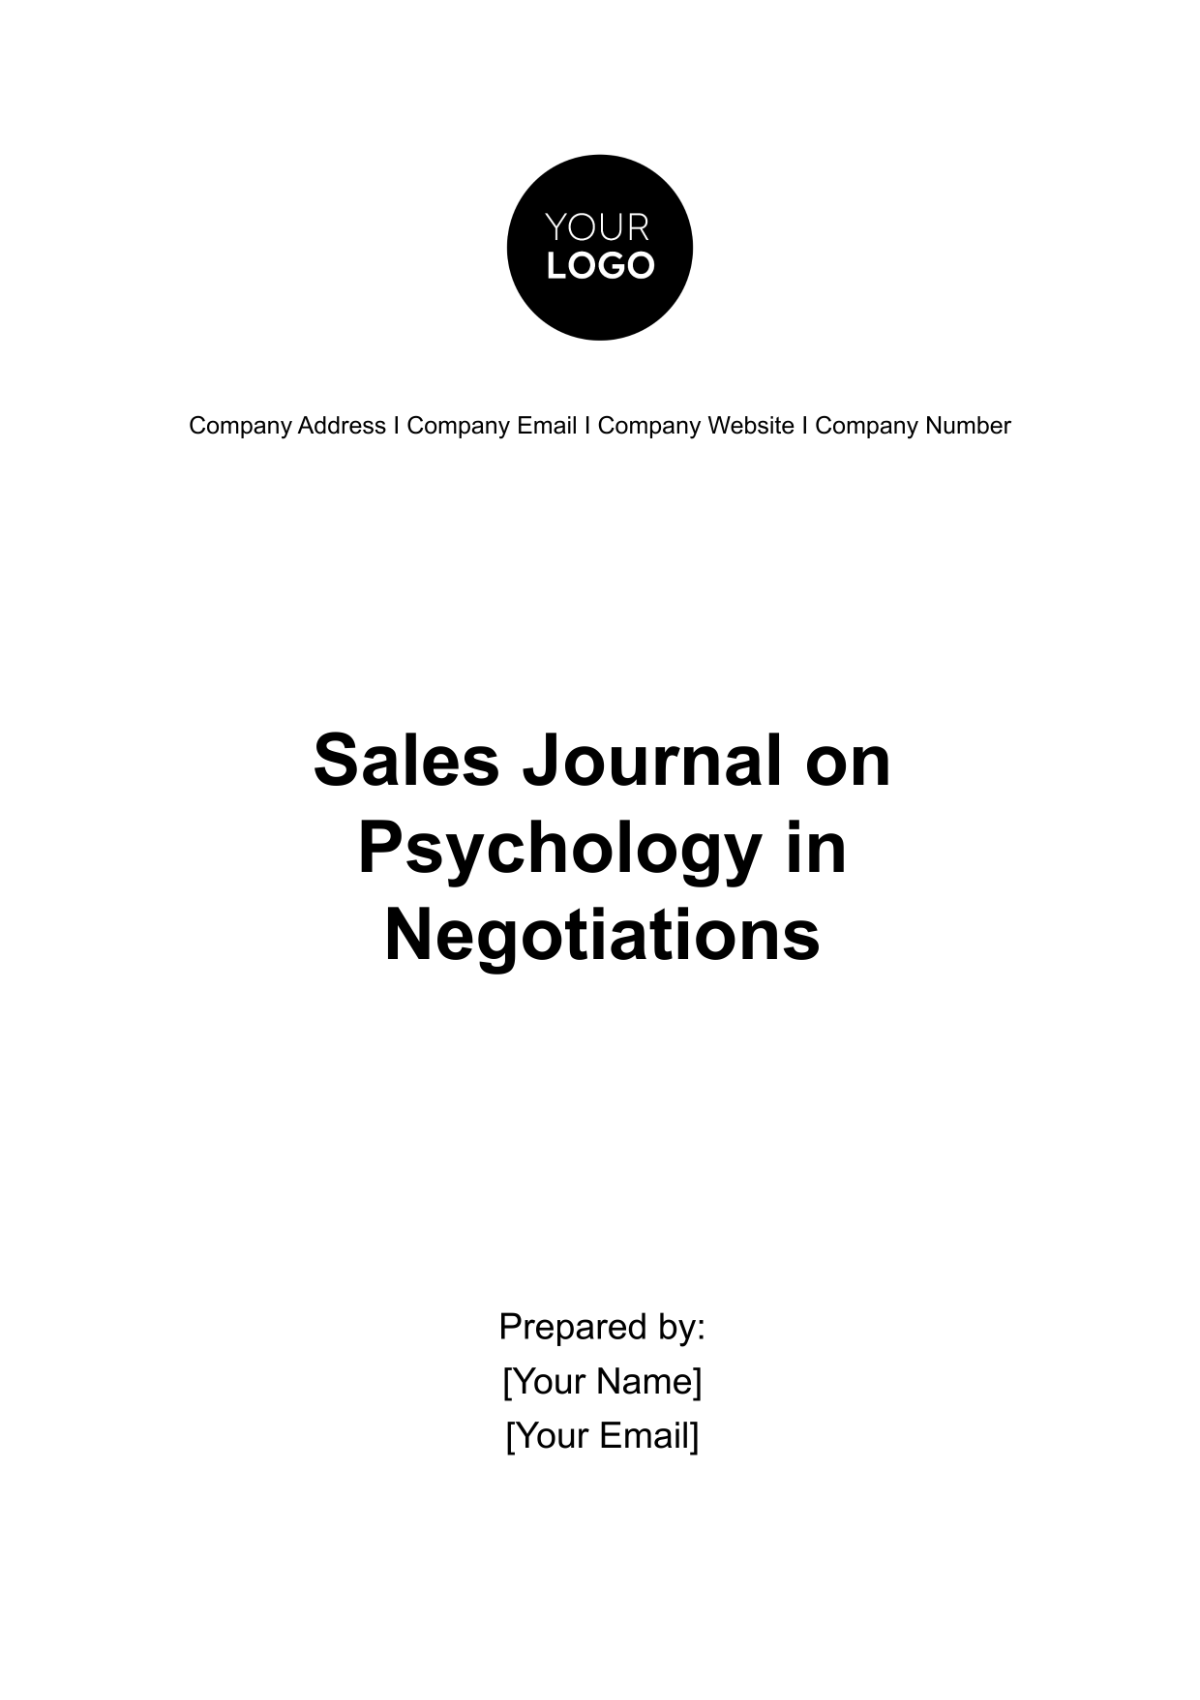 Free Sales Journal on Psychology in Negotiations Template